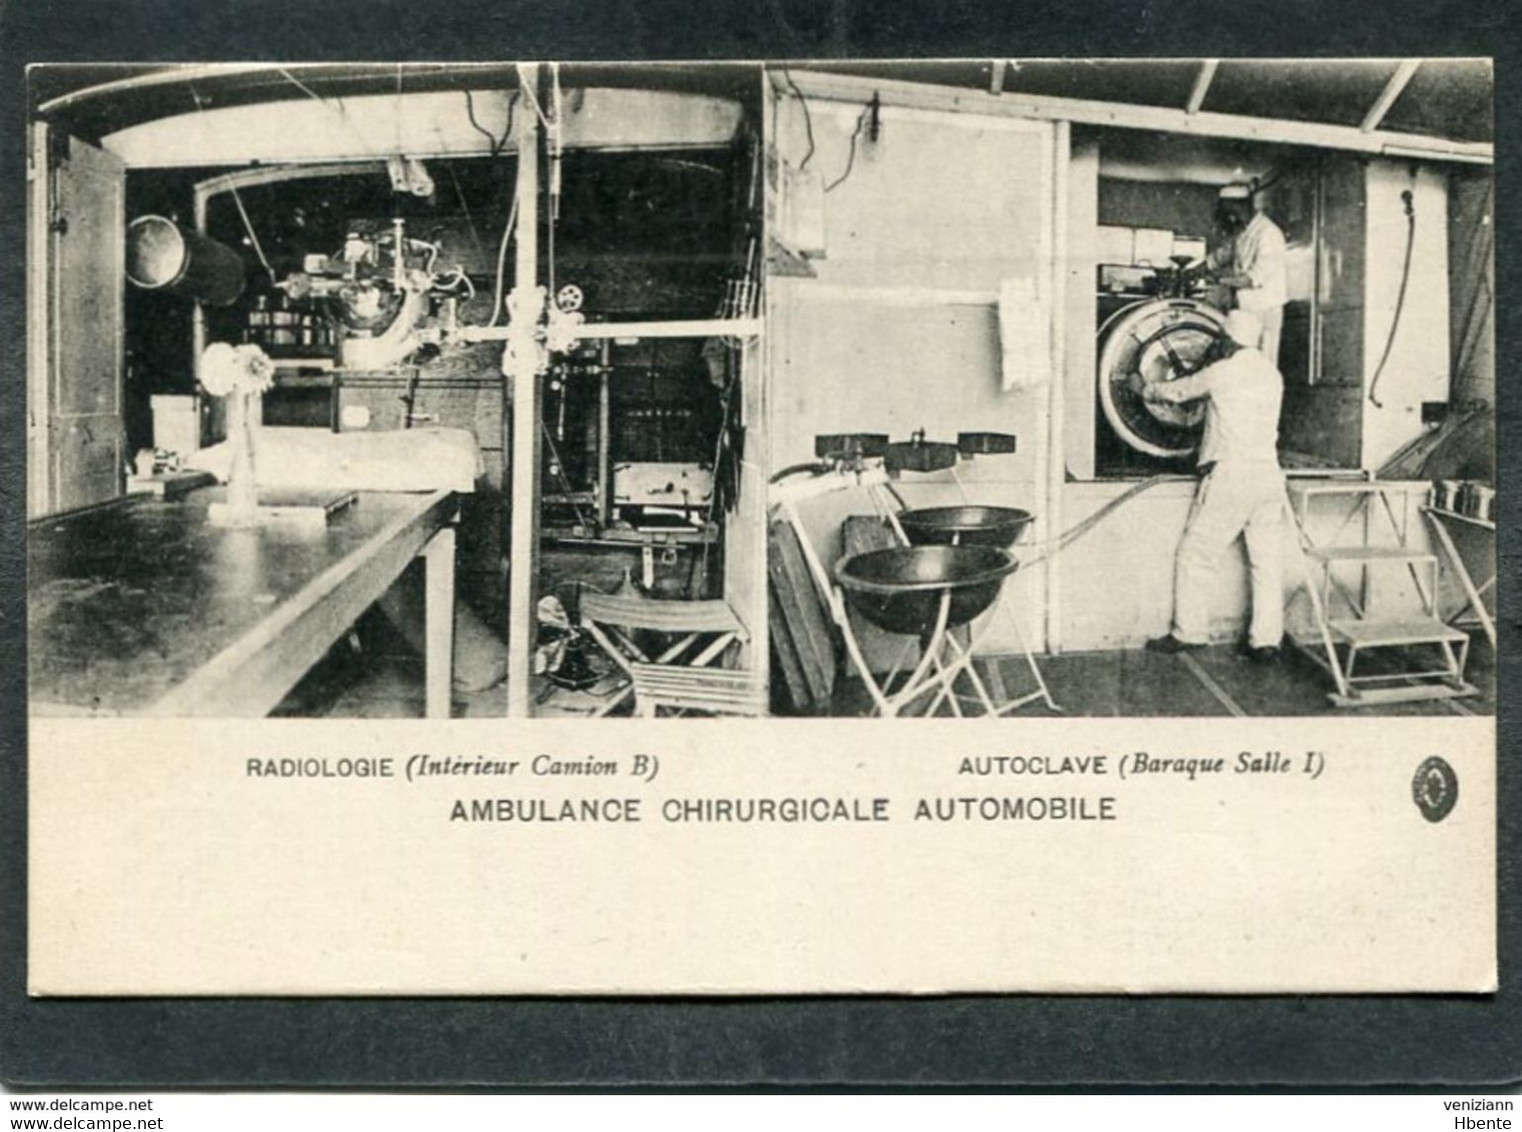 Ambulance Chirurgicale Automobile - Radiologie (Camion B) Autoclave (Baraque Salle 1) (Photo) - Coches